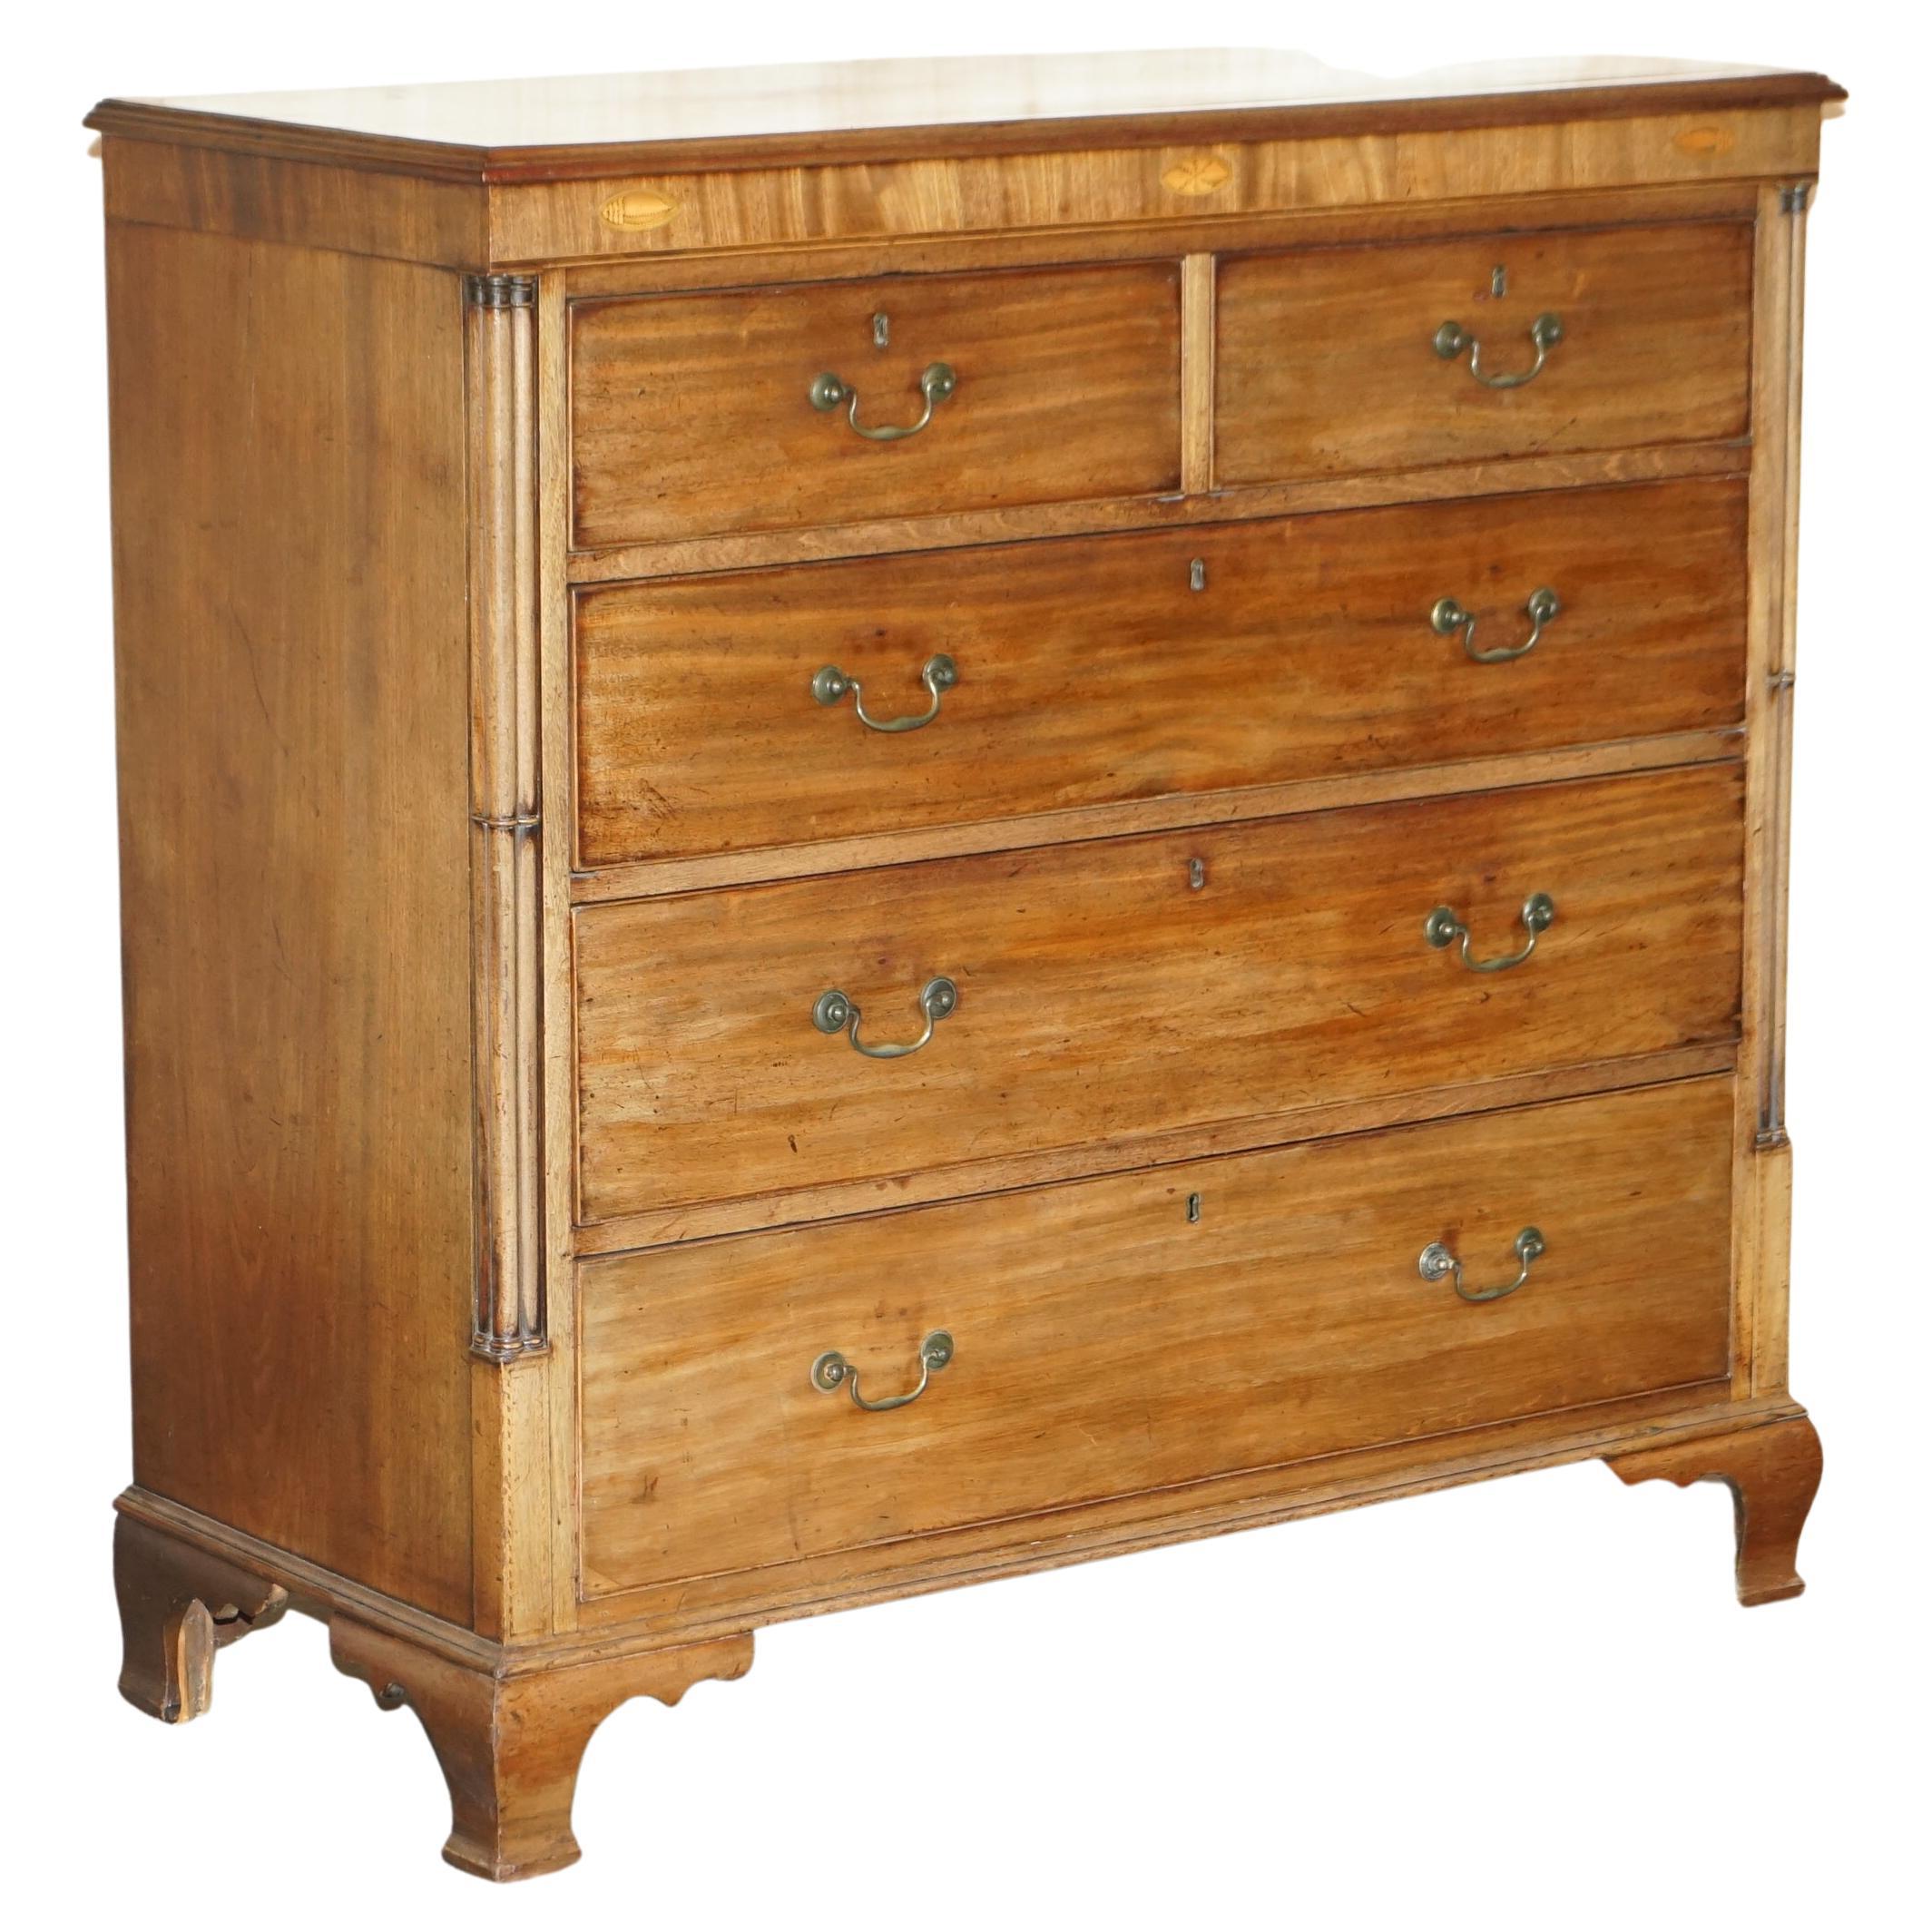 LARGE FiNE ANTIQUE THOMAS CHIPPENDALE SHERATON REVIVAL HARDWOOD CHEST OF DRAWERS For Sale